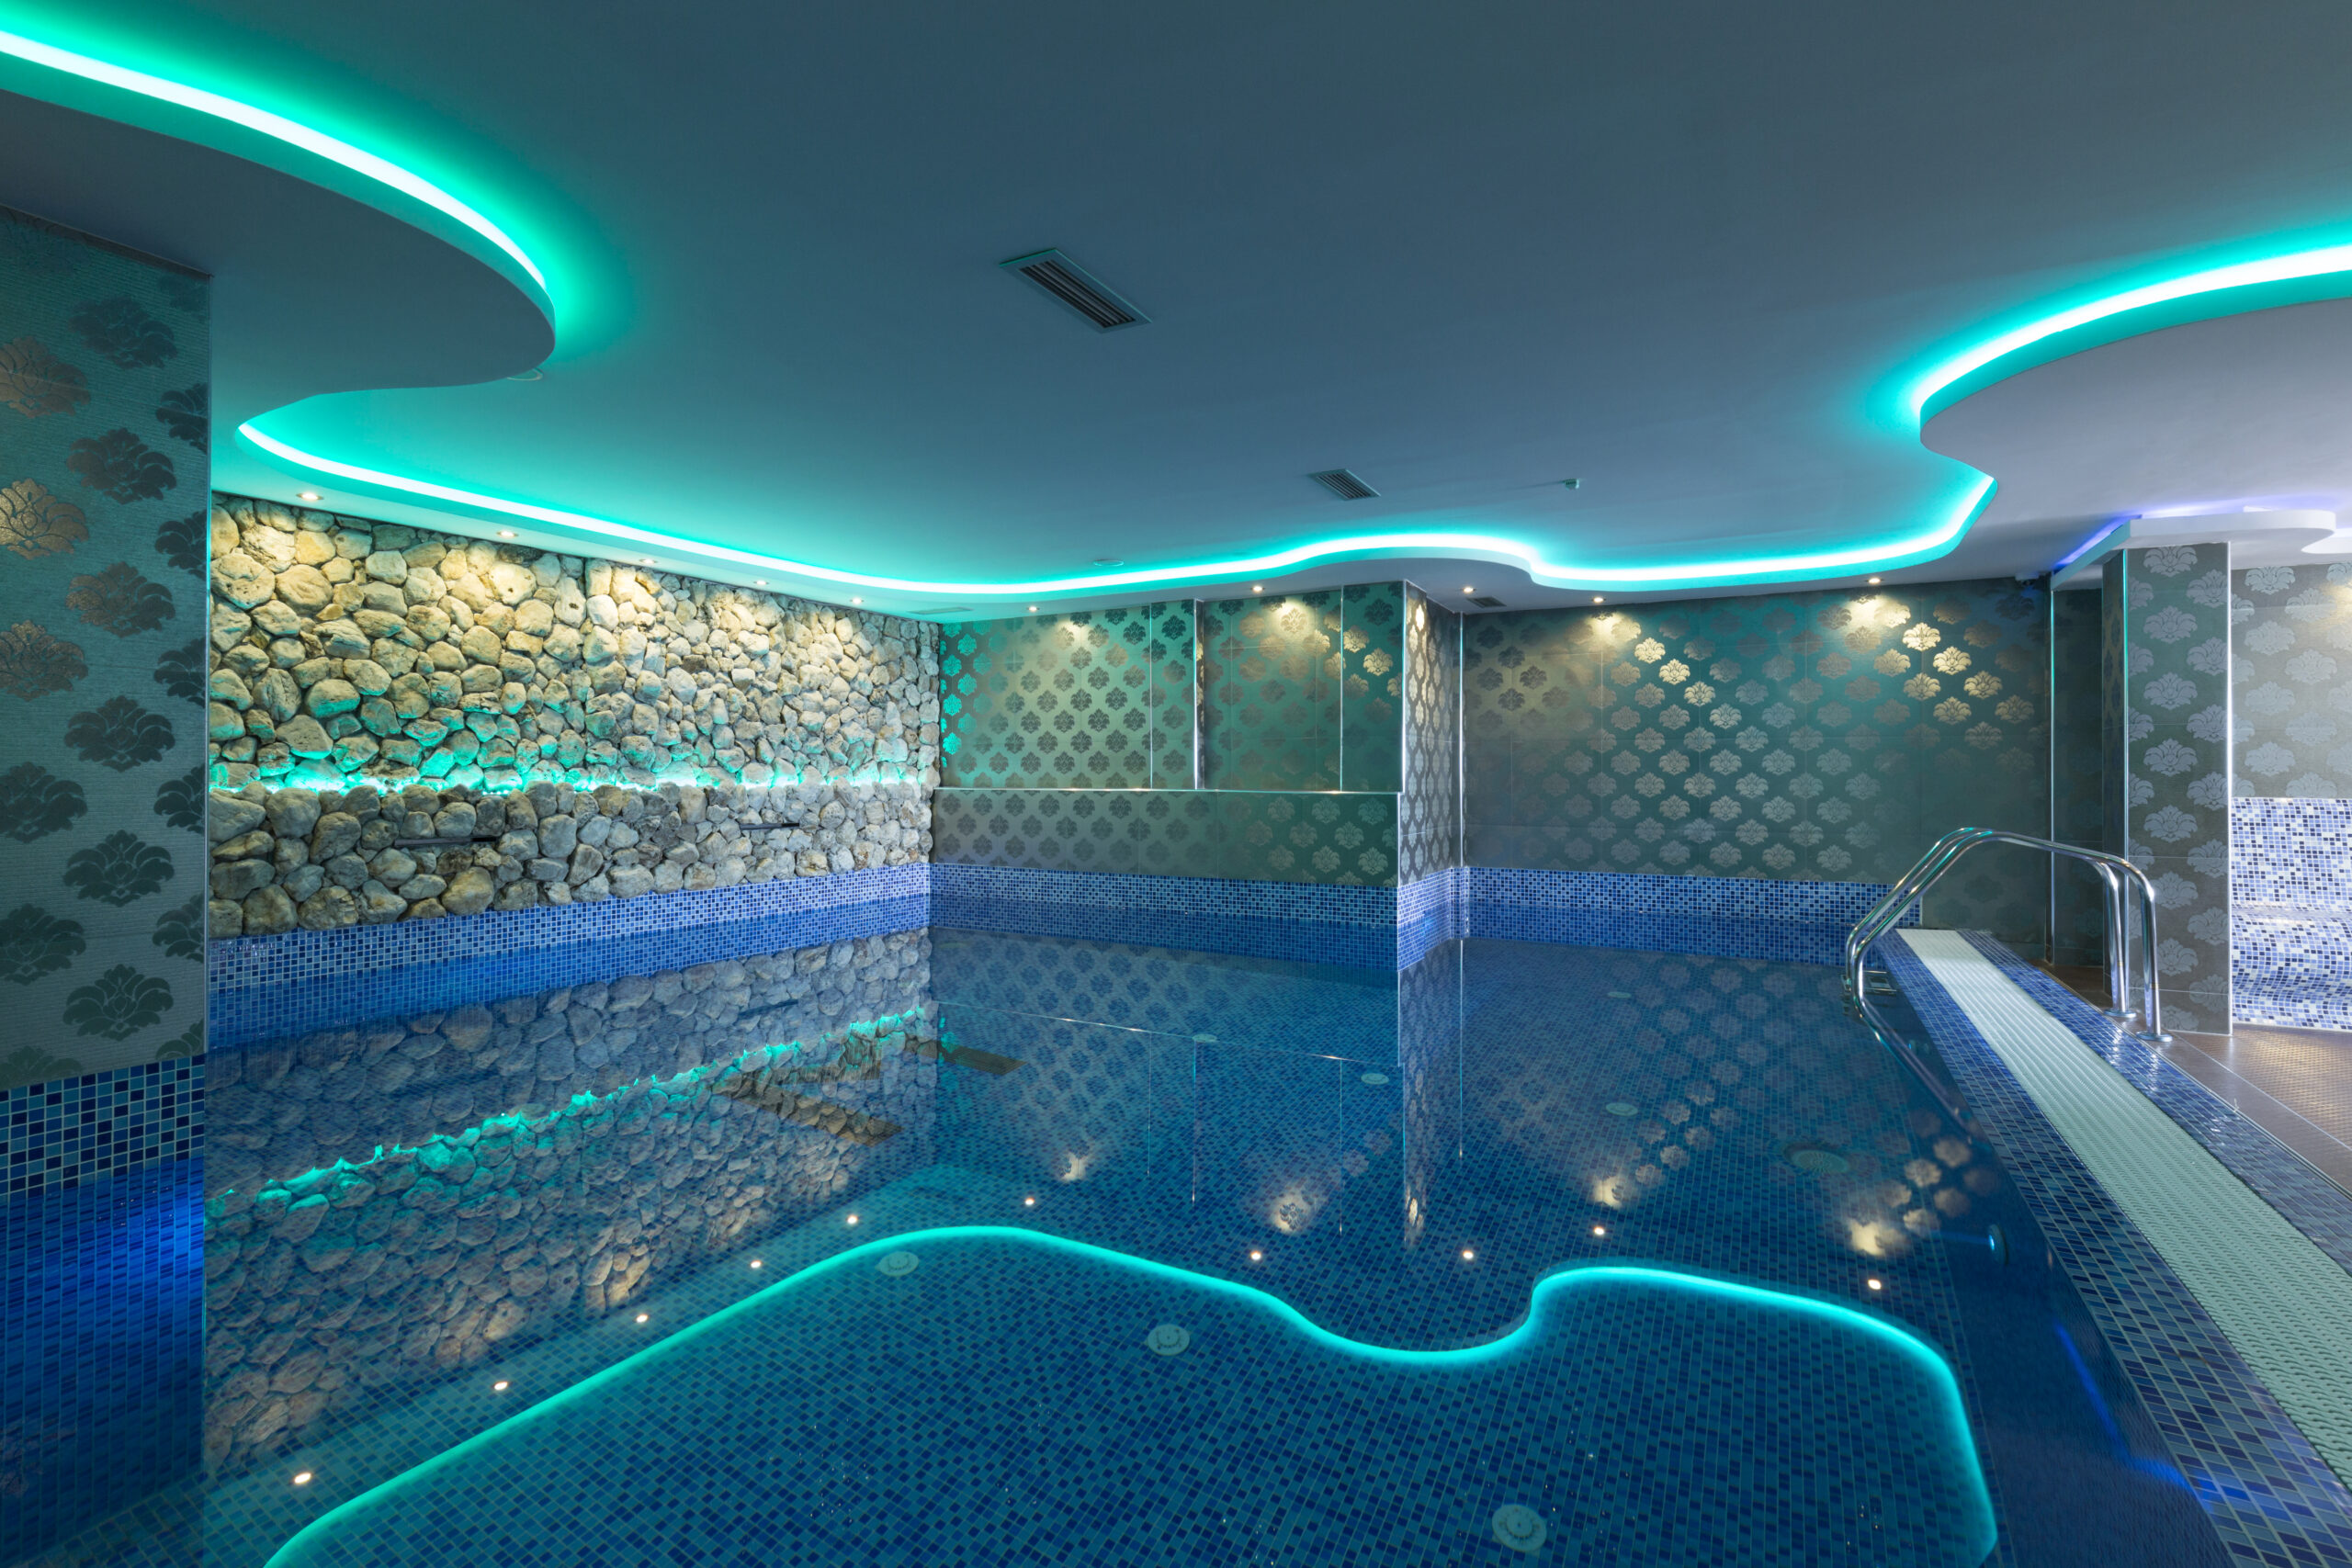 Indoor pool lighting design, showcasing various fixtures and arrangements that create an inviting and visually appealing atmosphere in an enclosed swimming area.